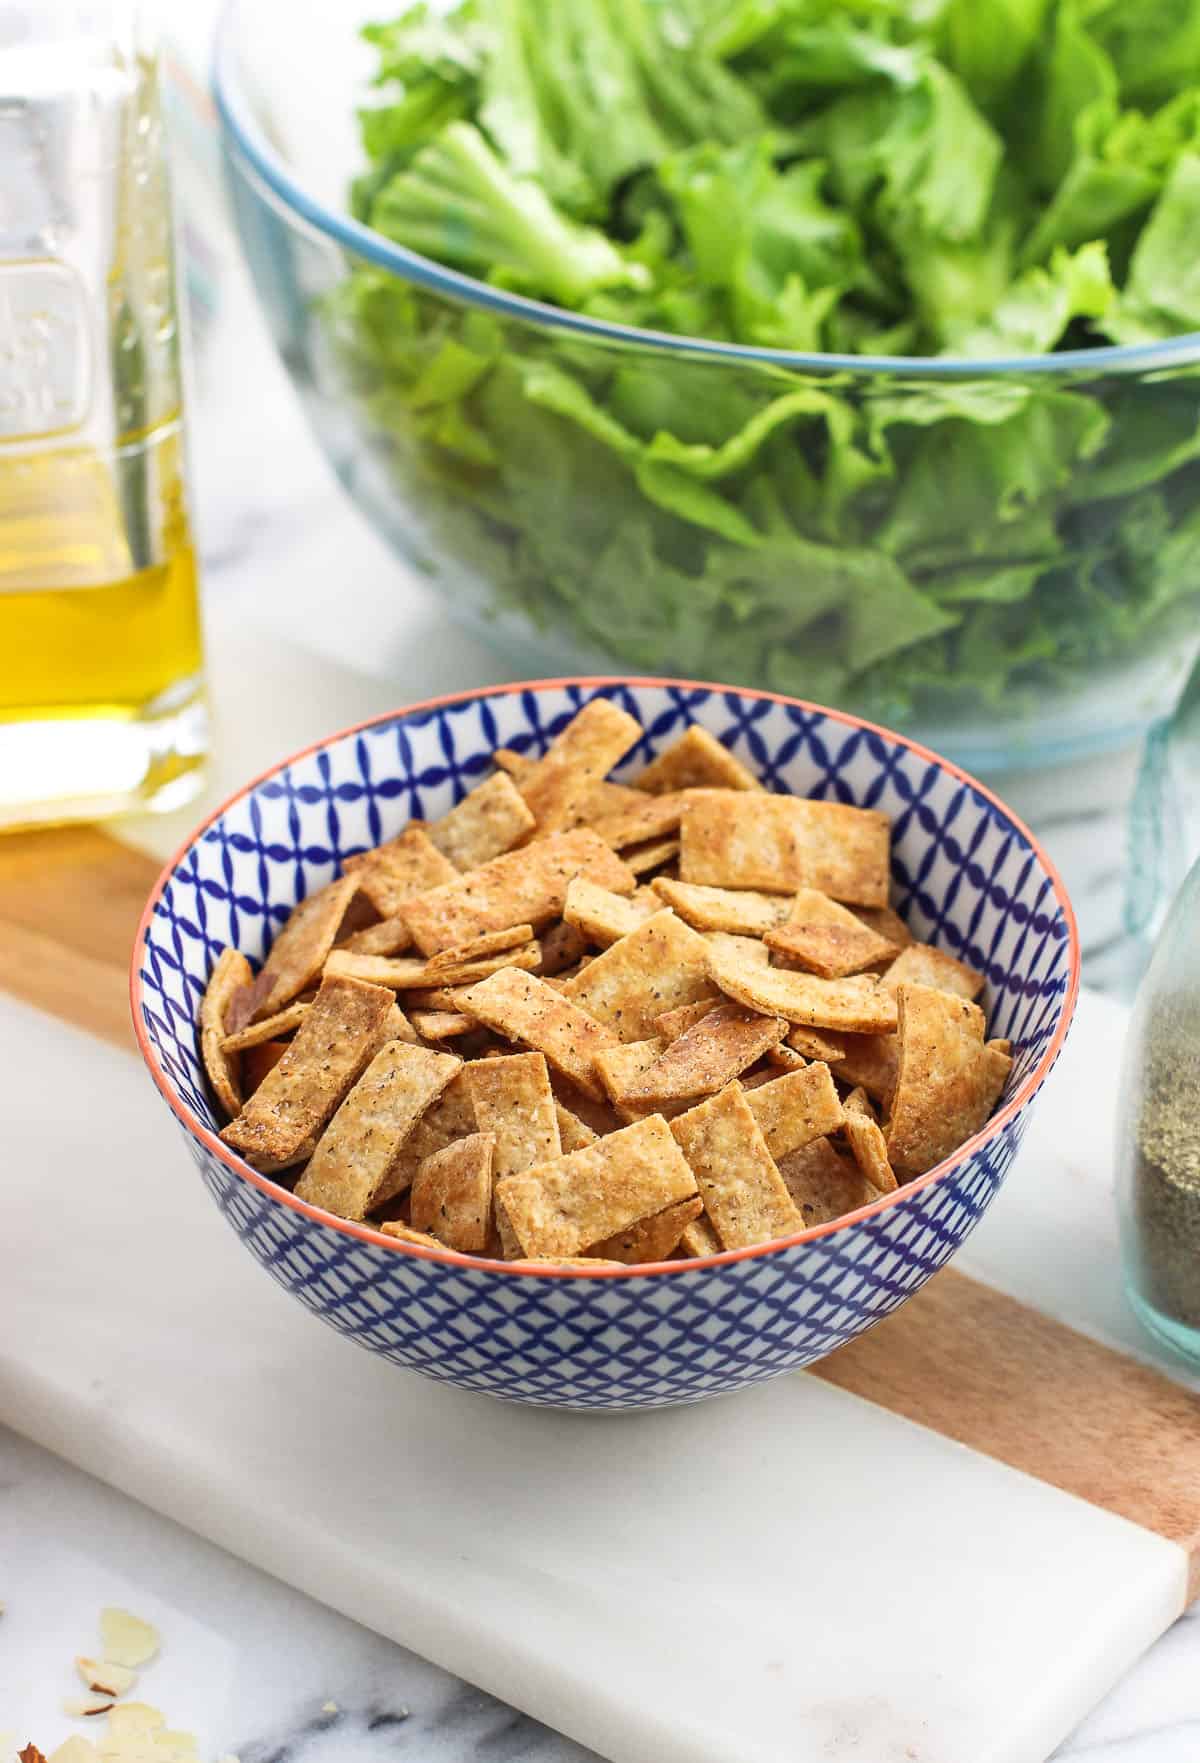 Baked tortilla strips in a small ceramic bowl.